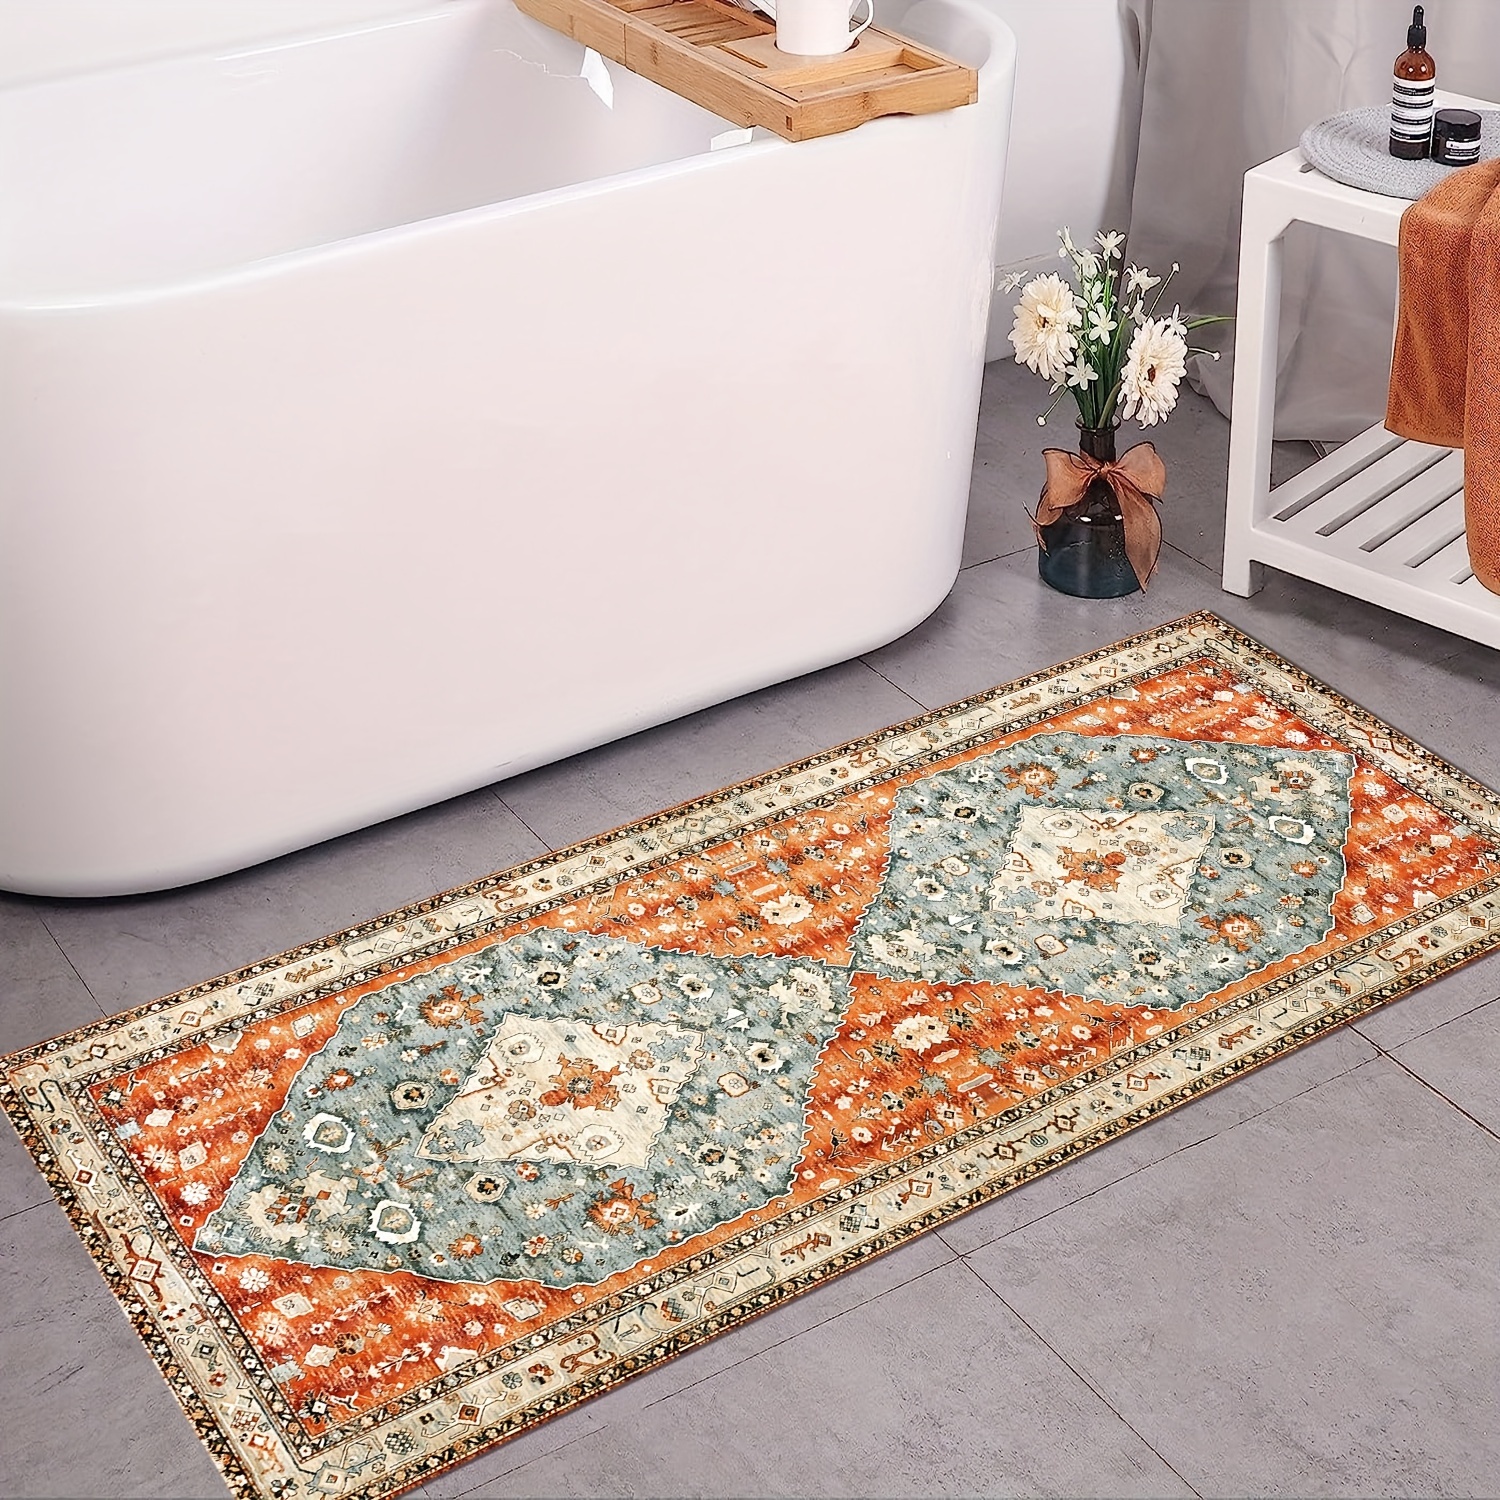 EARTHALL 2x3 Rug Boho, Vintage Entryway Rugs Indoor Doormat, Washable  Non-Slip Small Bathroom Throw Rugs, Low-Pile Faux Wool Throw Rugs, Small  Carpet